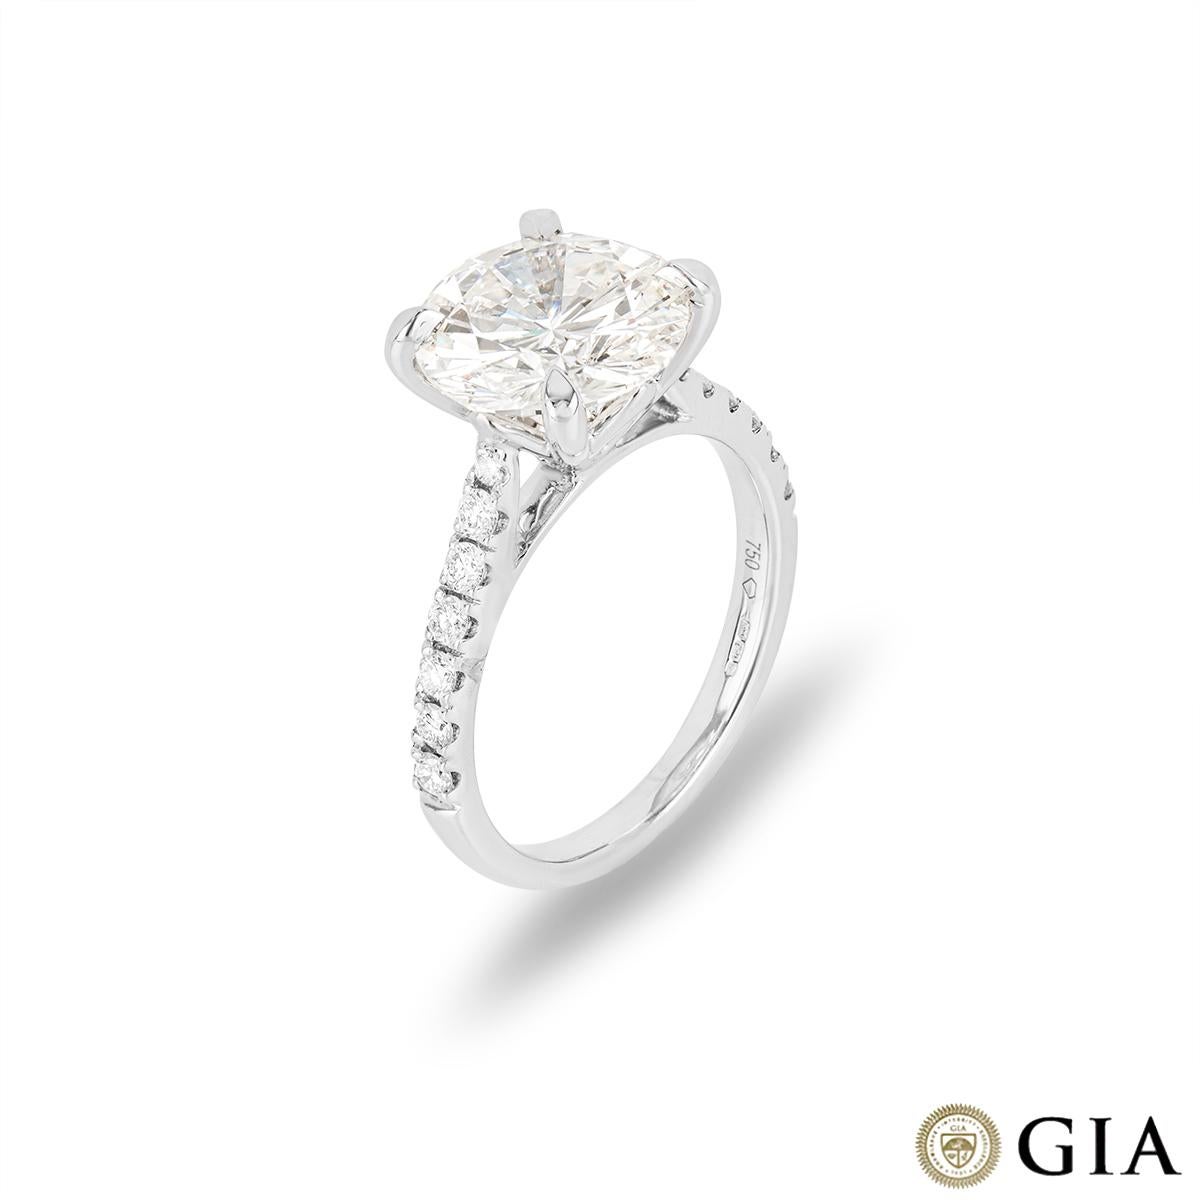 A spectacular 18k white gold diamond engagement ring. The engagement ring is set to the centre with a round brilliant cut diamond weighing 3.52ct, K colour and SI1 clarity. Complementing the impressive centre diamond are 14 round brilliant cut